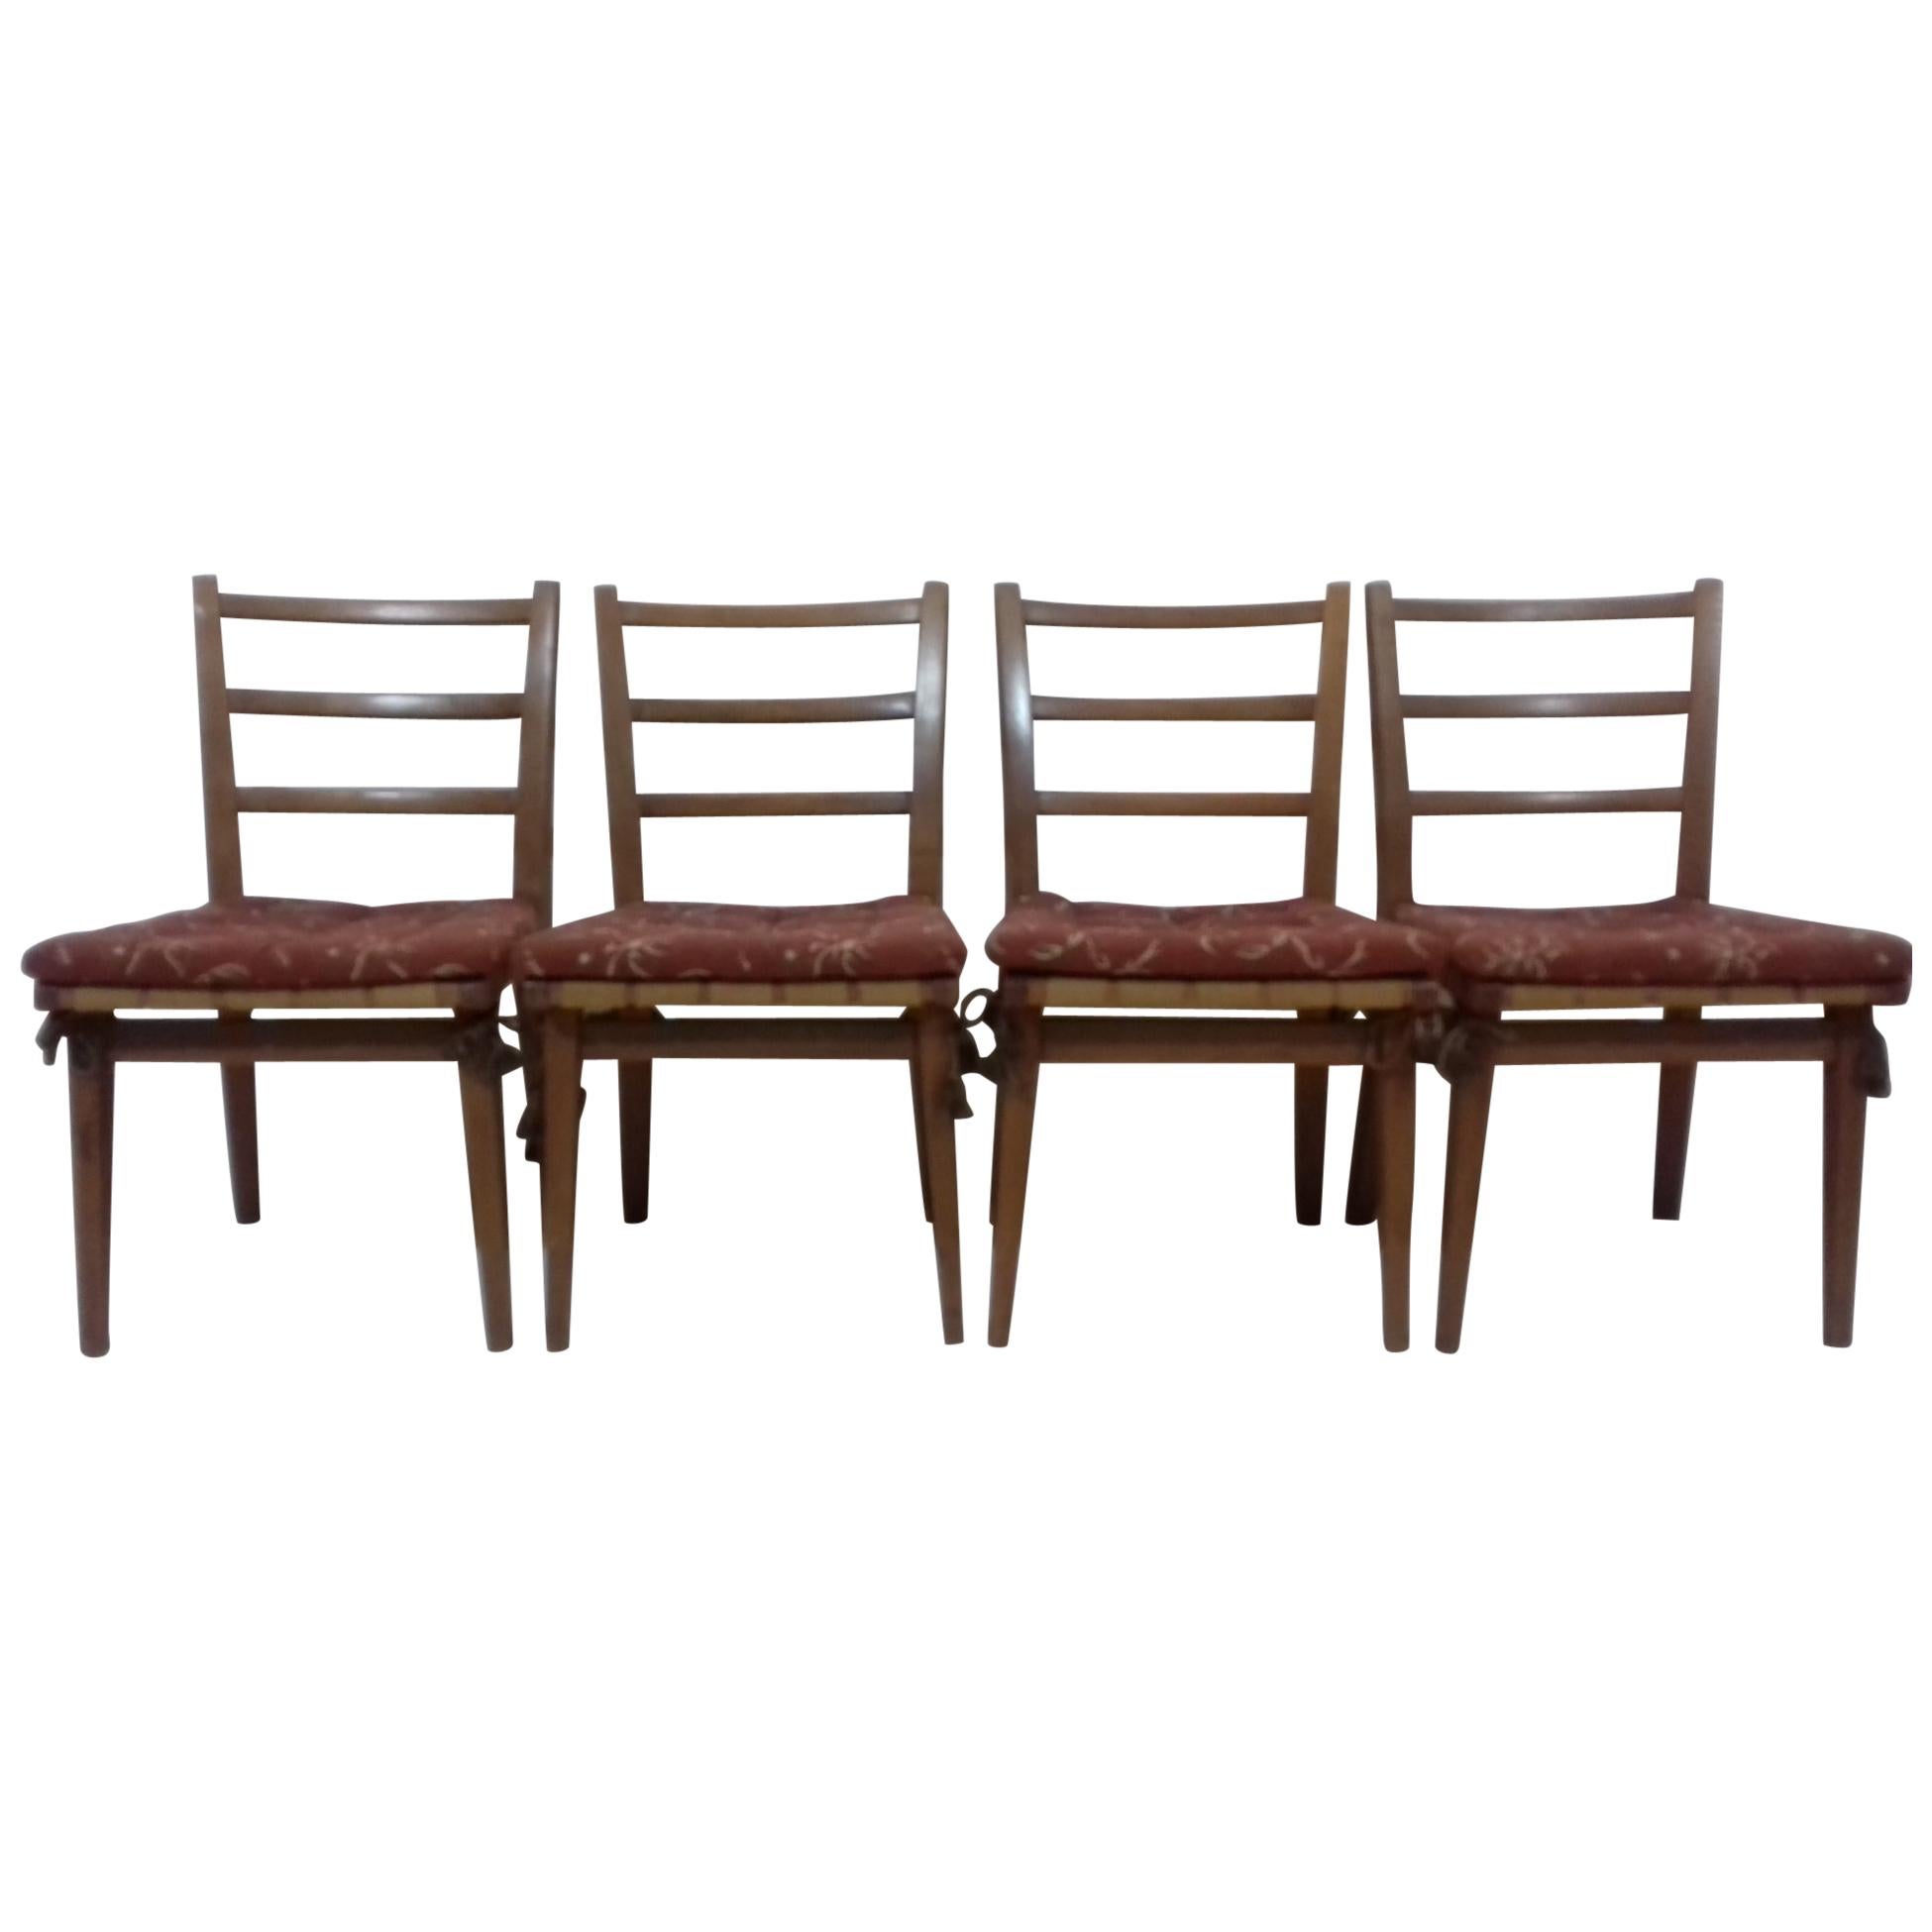 Set of Four Dining Chairs by Jan Vaněk, 1955 For Sale